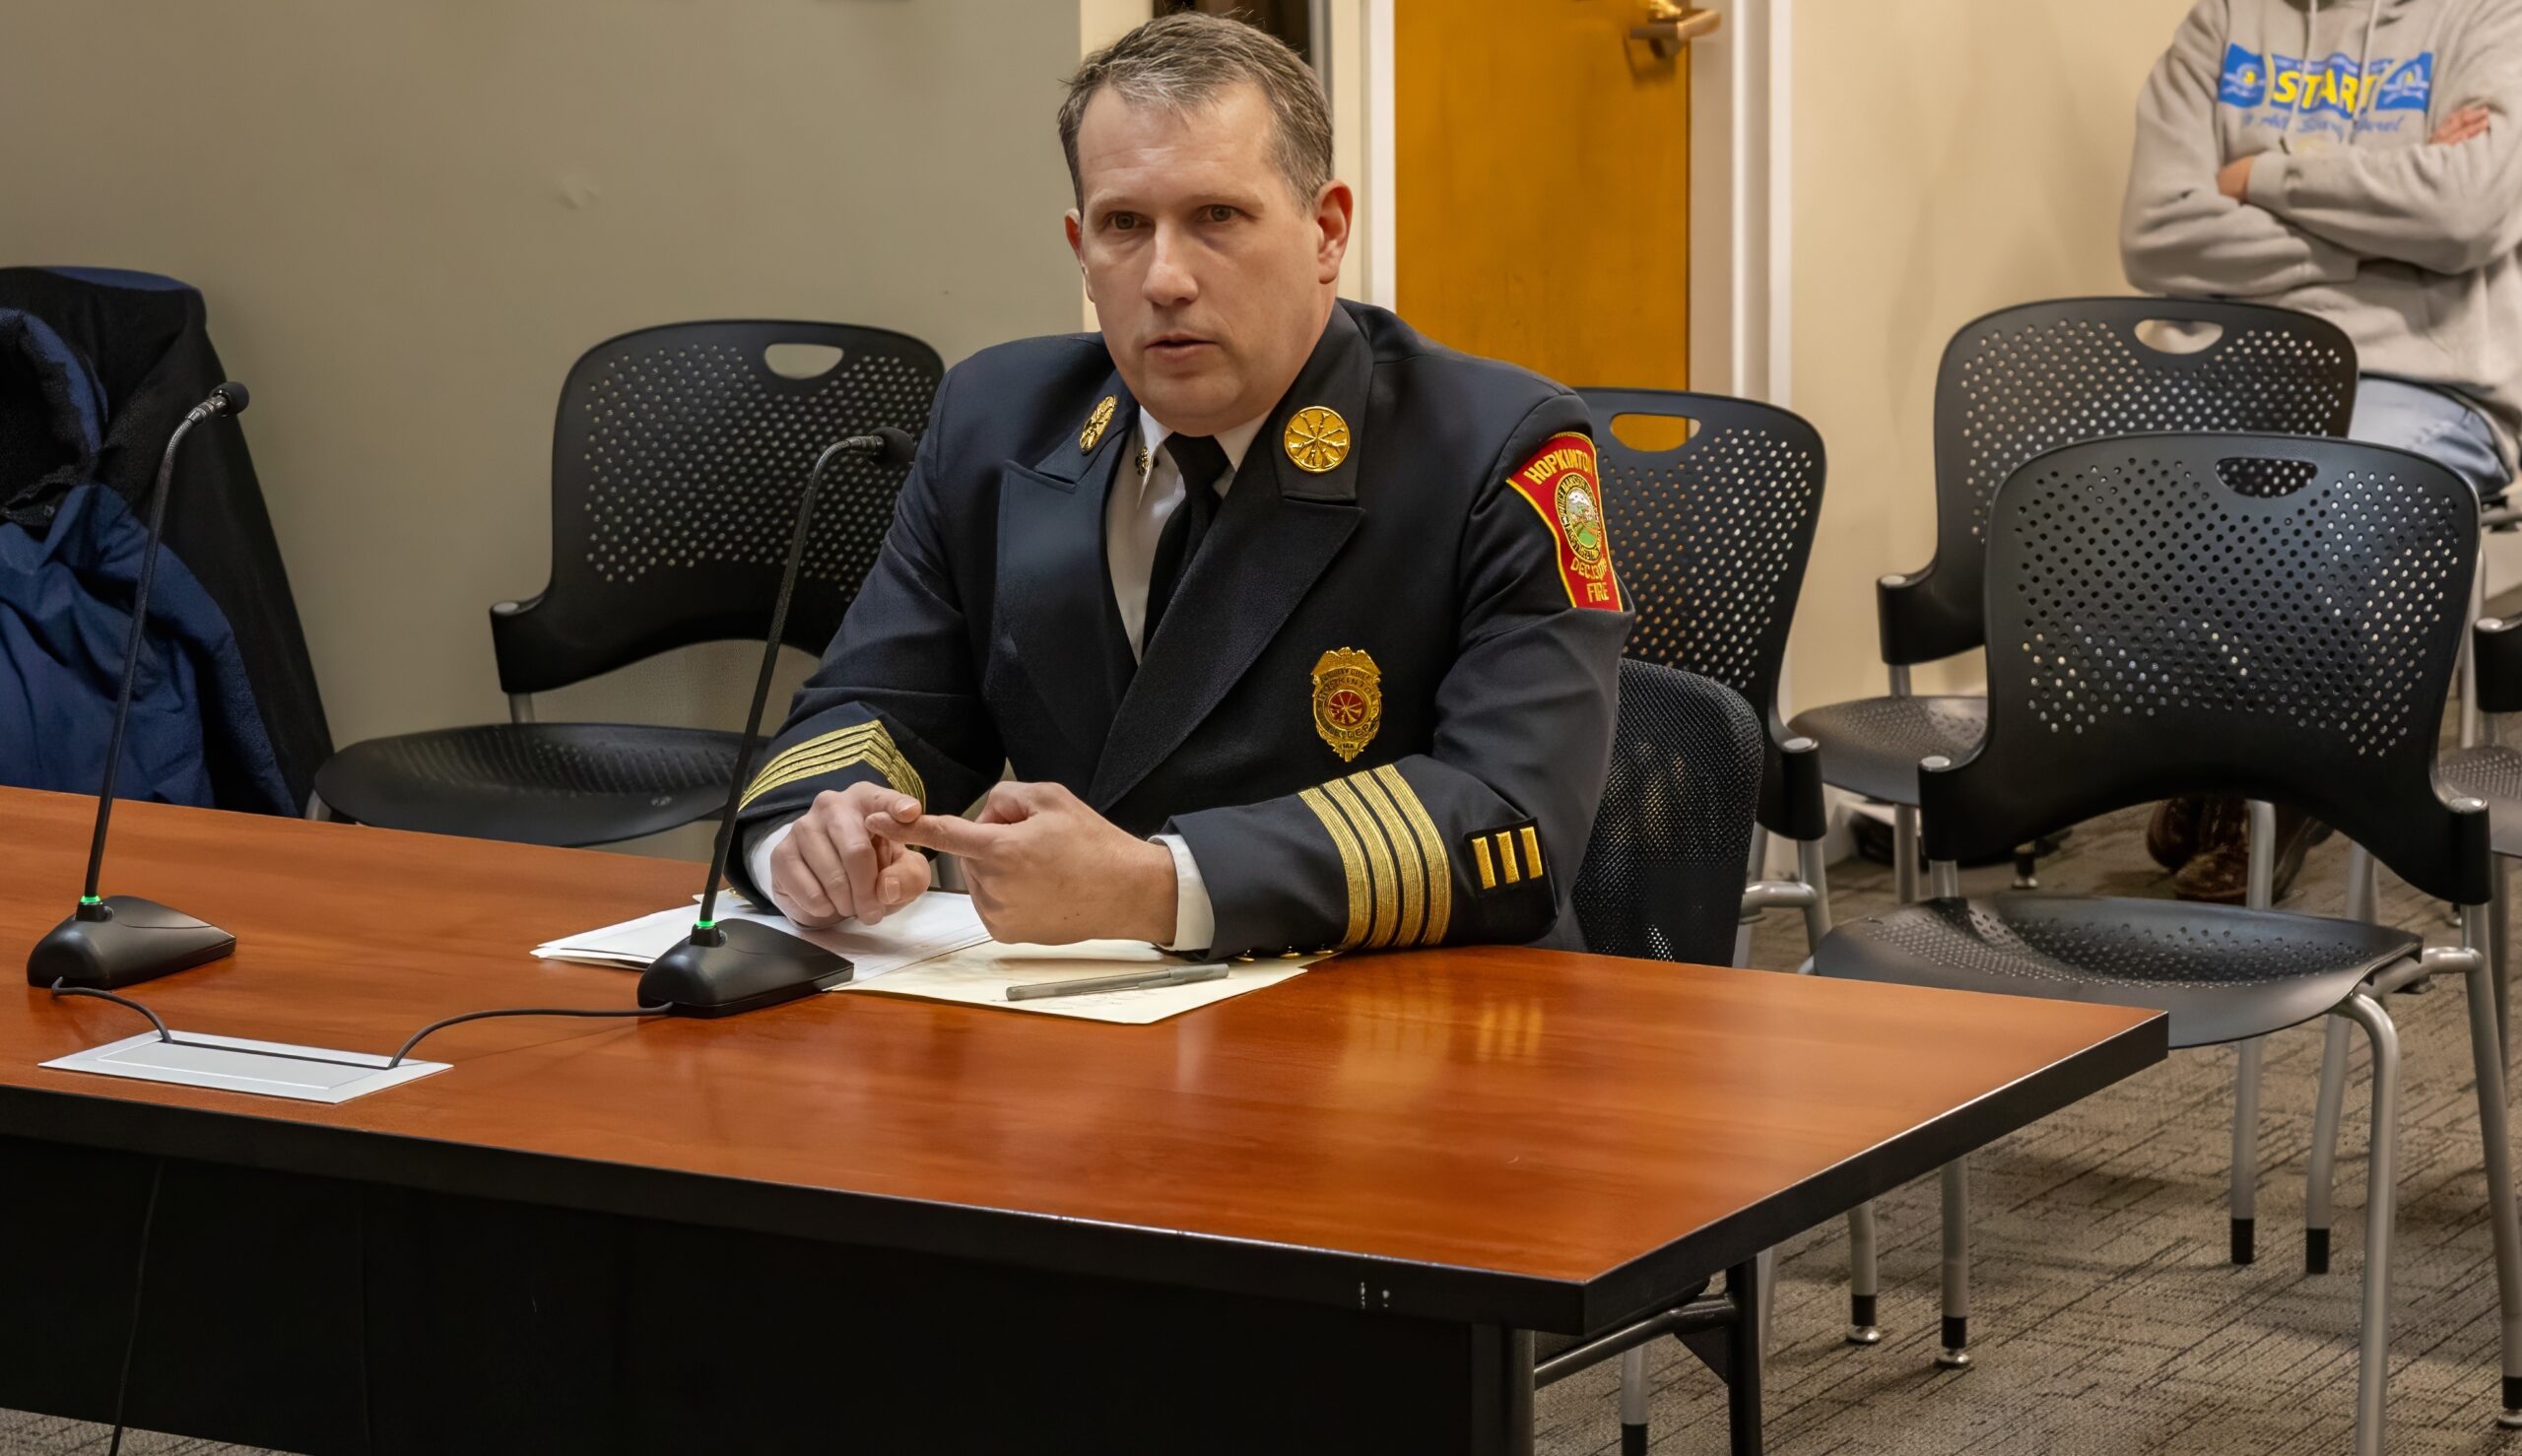 Select Board unanimously selects Daugherty as town’s fire chief